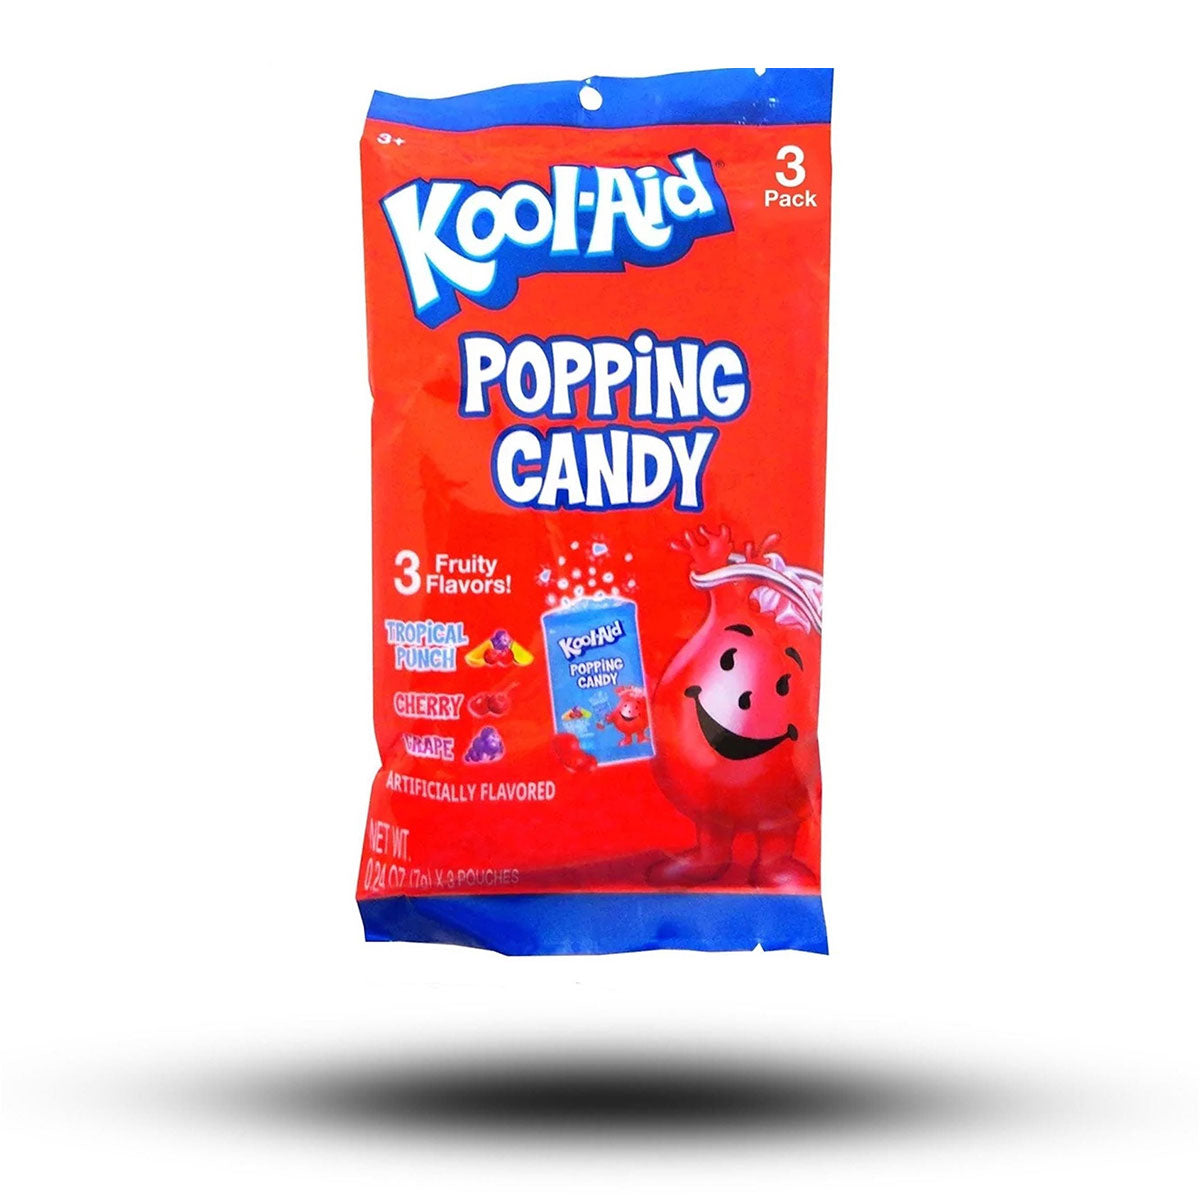 Kool Aid Popping Candy 21g